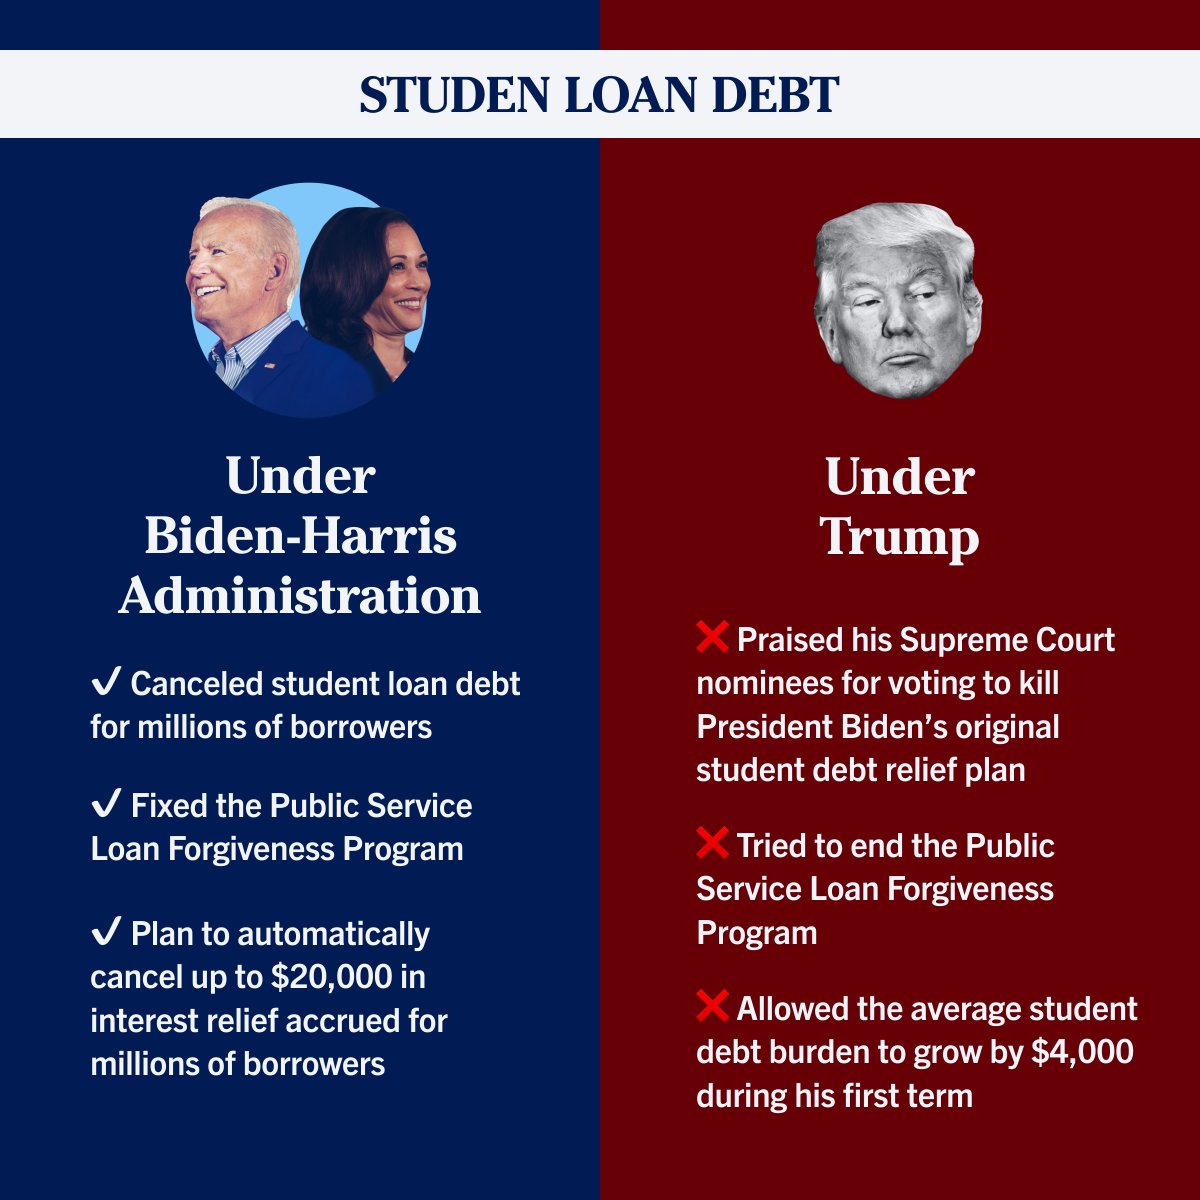 President Biden and Vice President Harris want to provide relief for student loan borrowers. Trump does not.